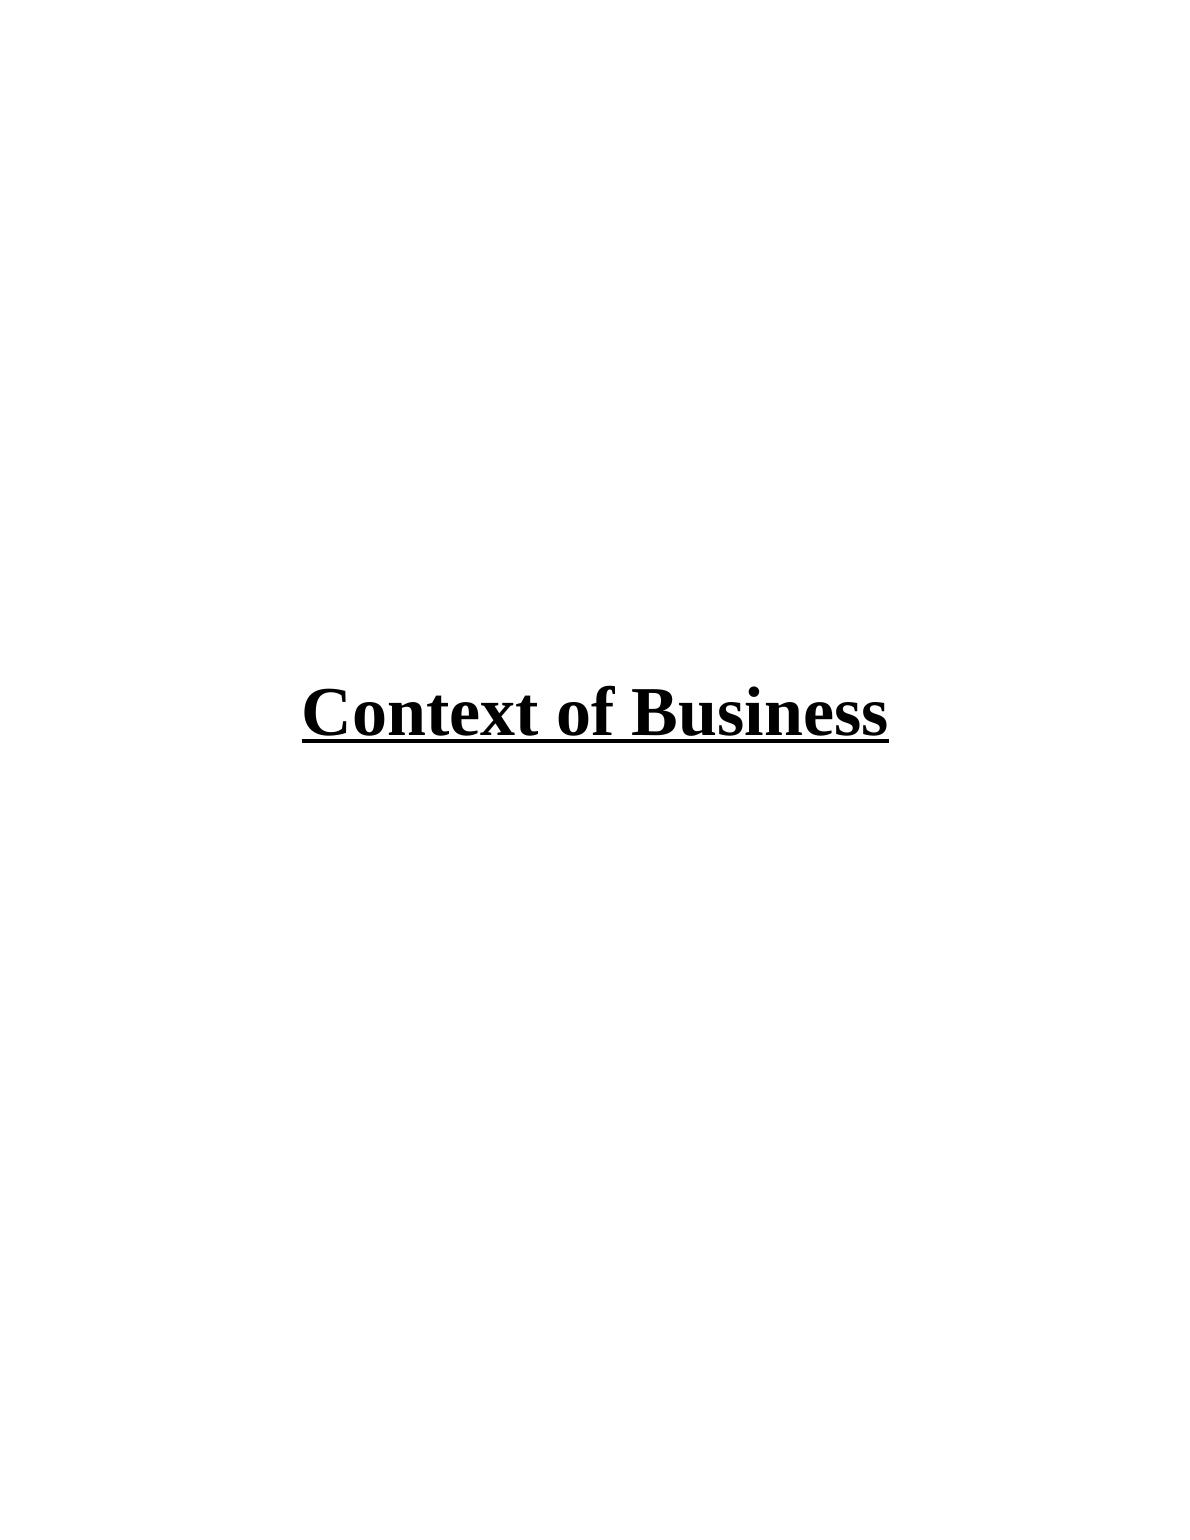 Tesco's vision, leadership style and management style: TASK 11 1. The context of business_1